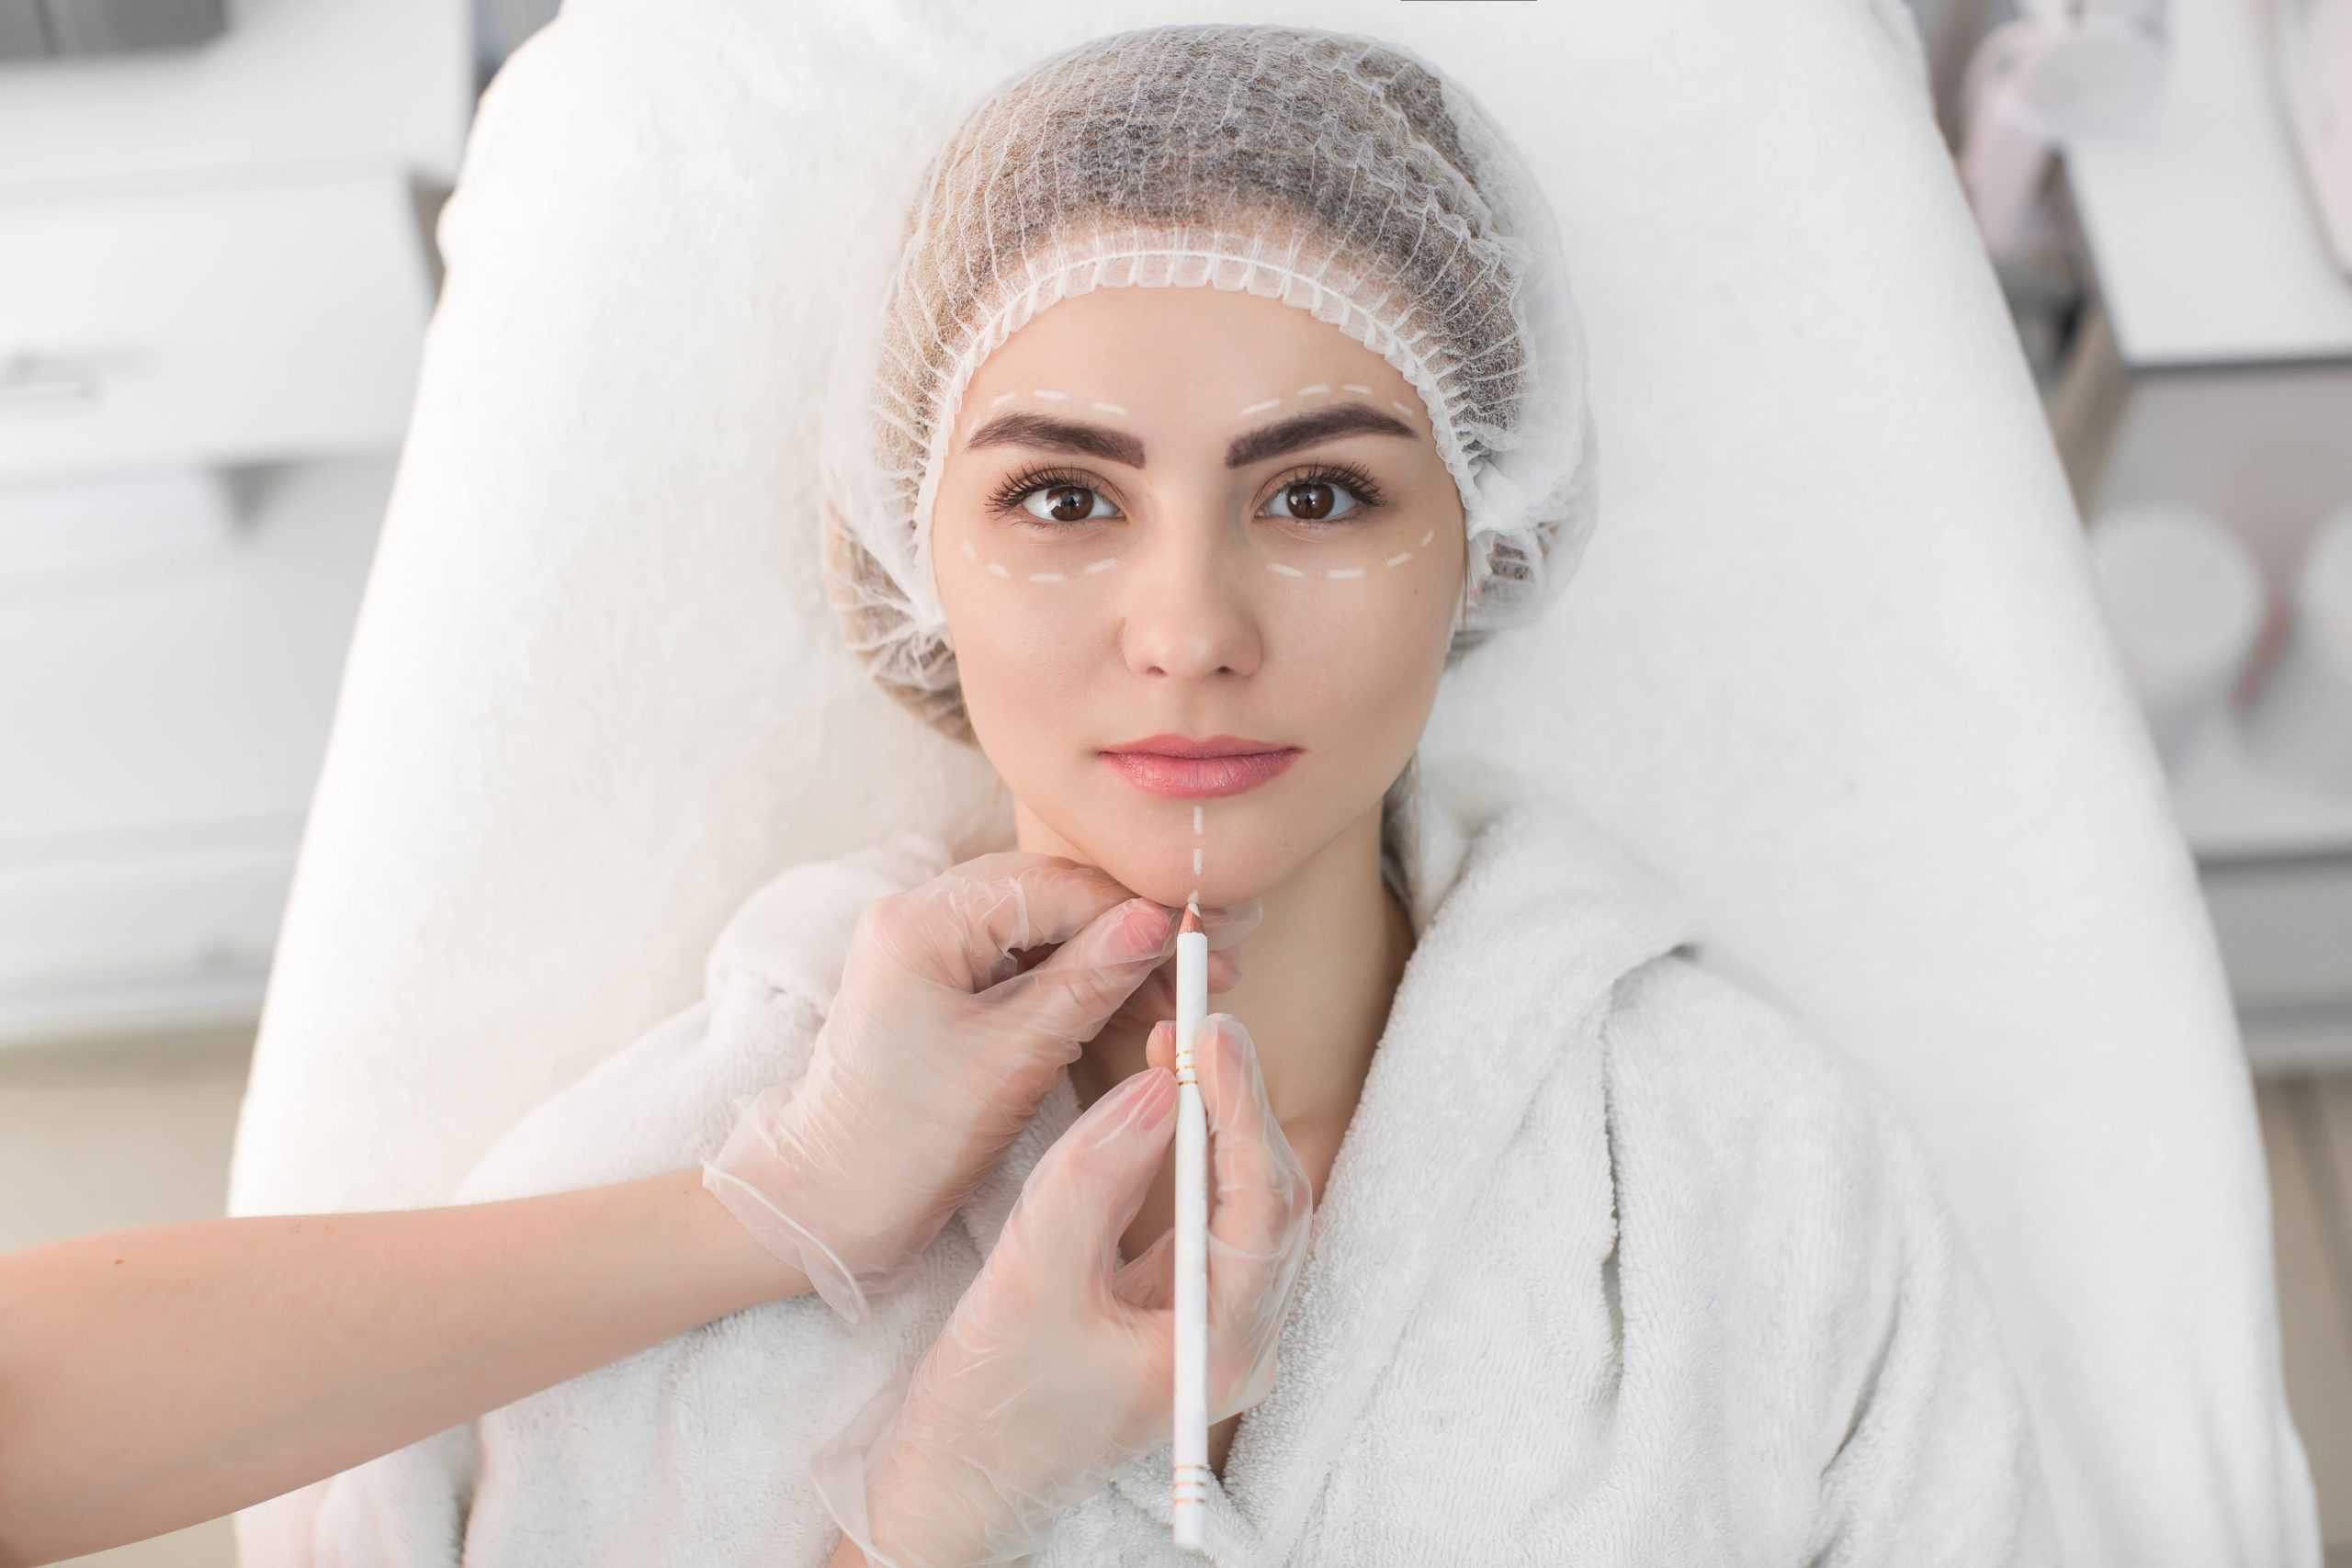 Tips to speed up your recovery after plastic surgery